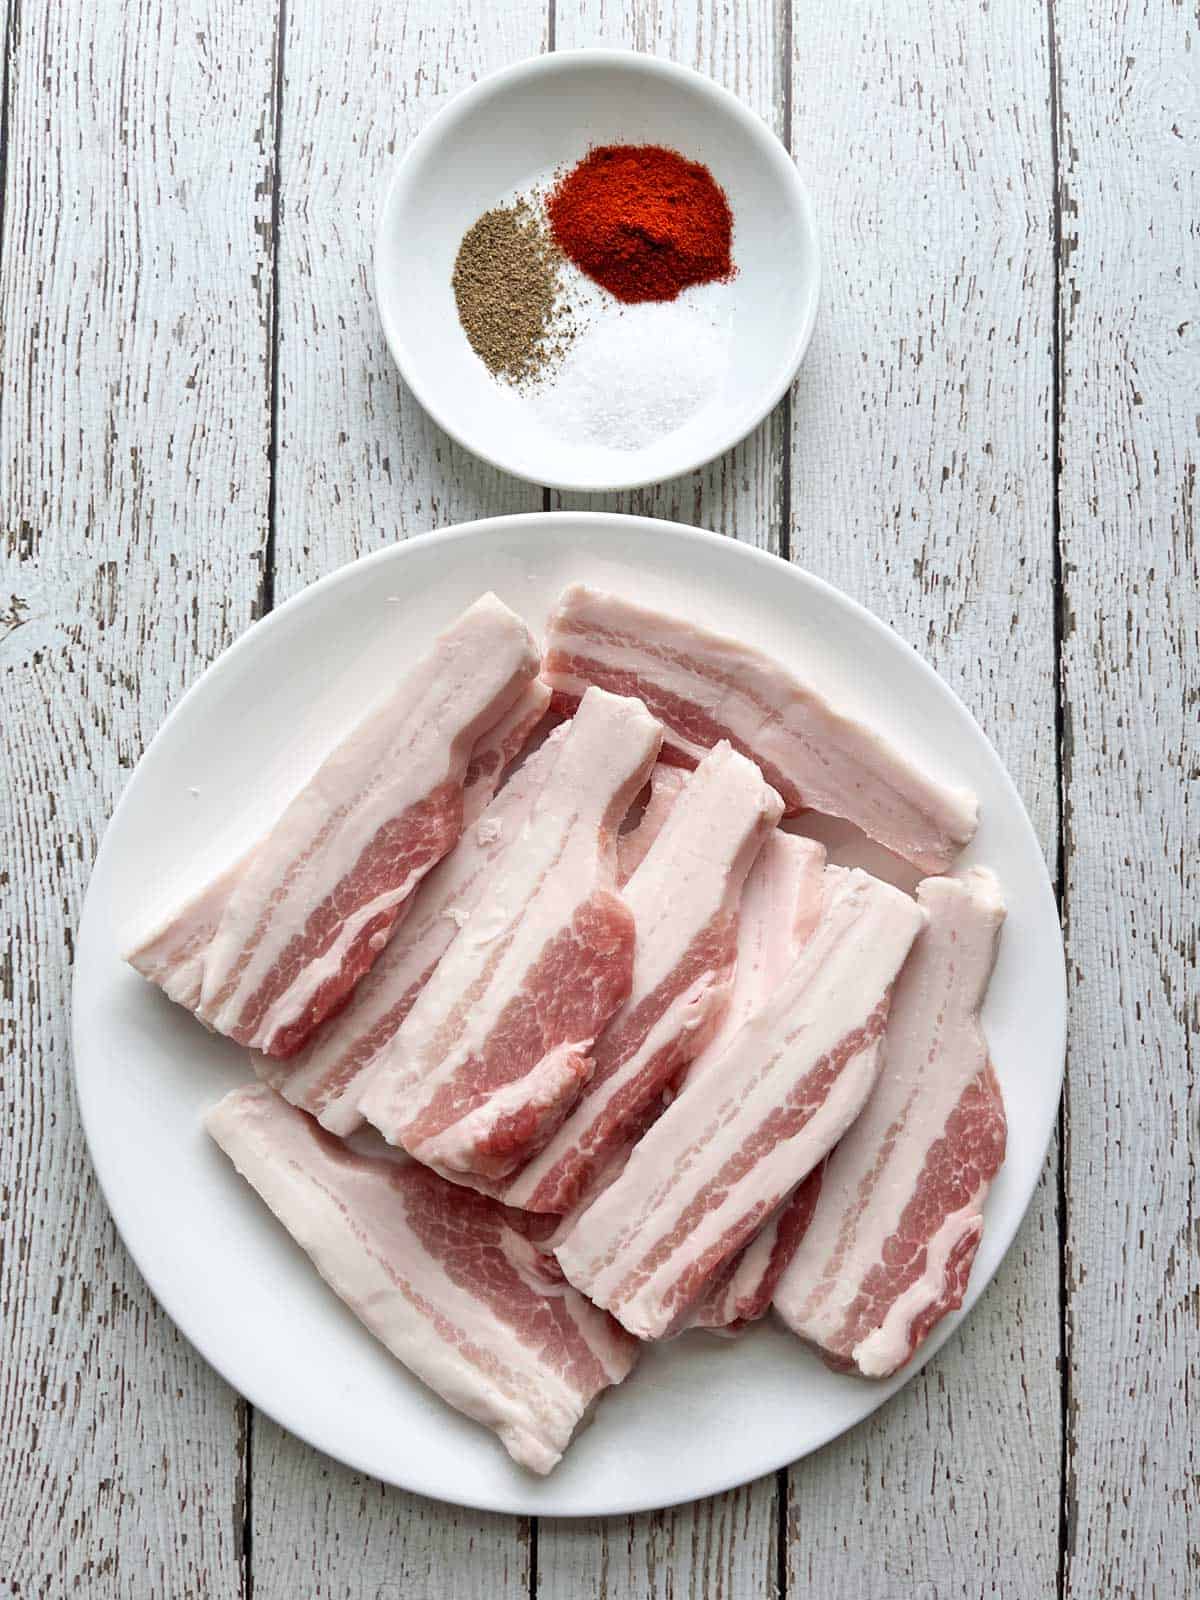 The ingredients needed to cook pork belly strips. 